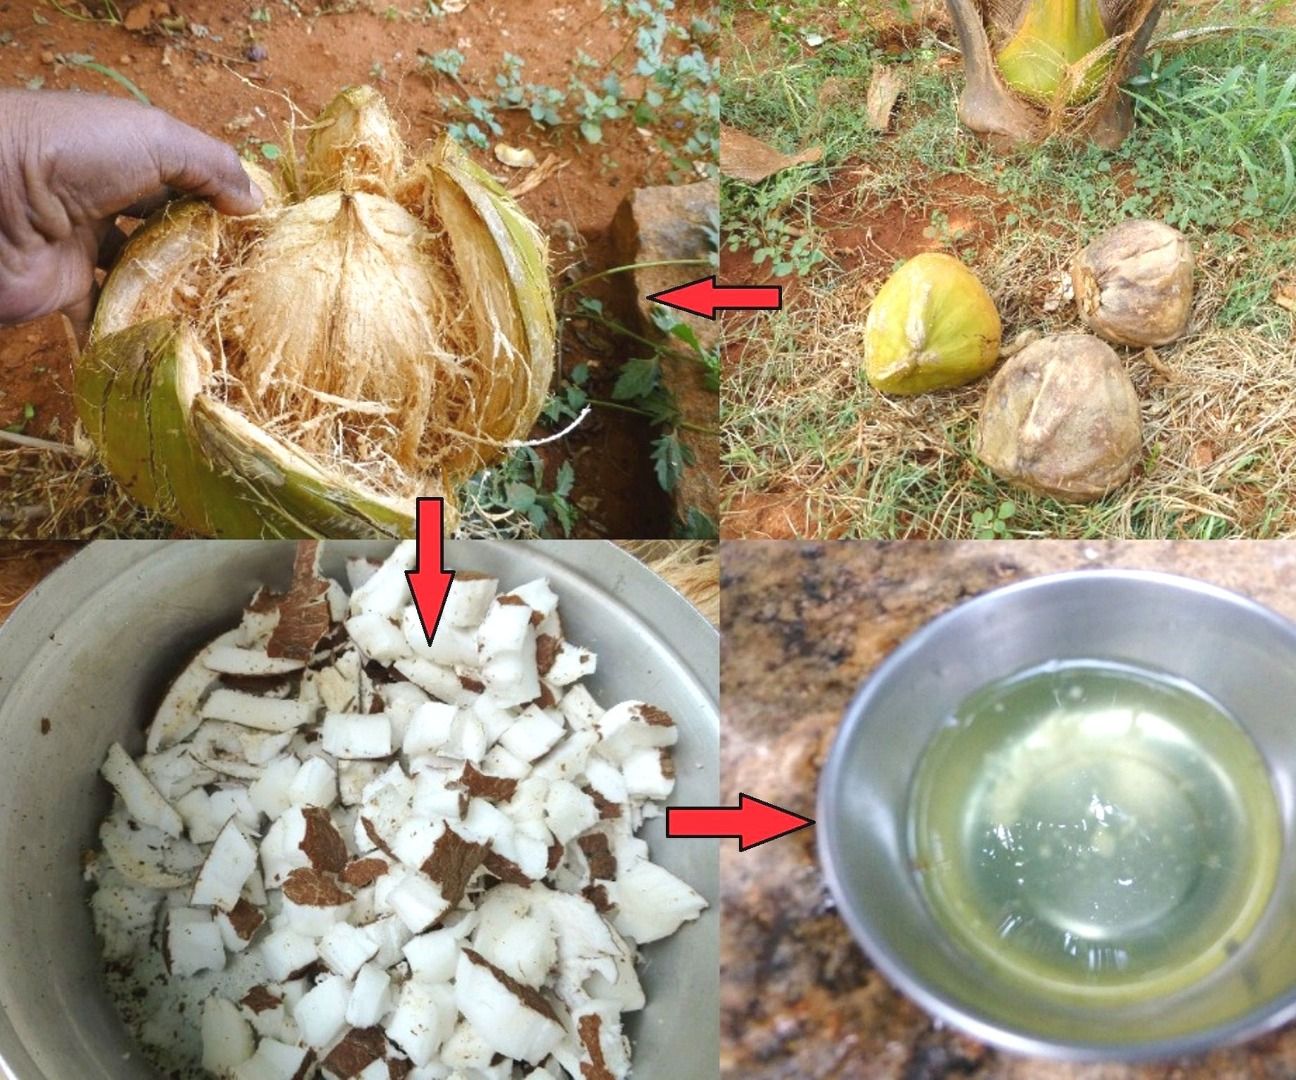 How To Make Coconut Oil From Scratch...